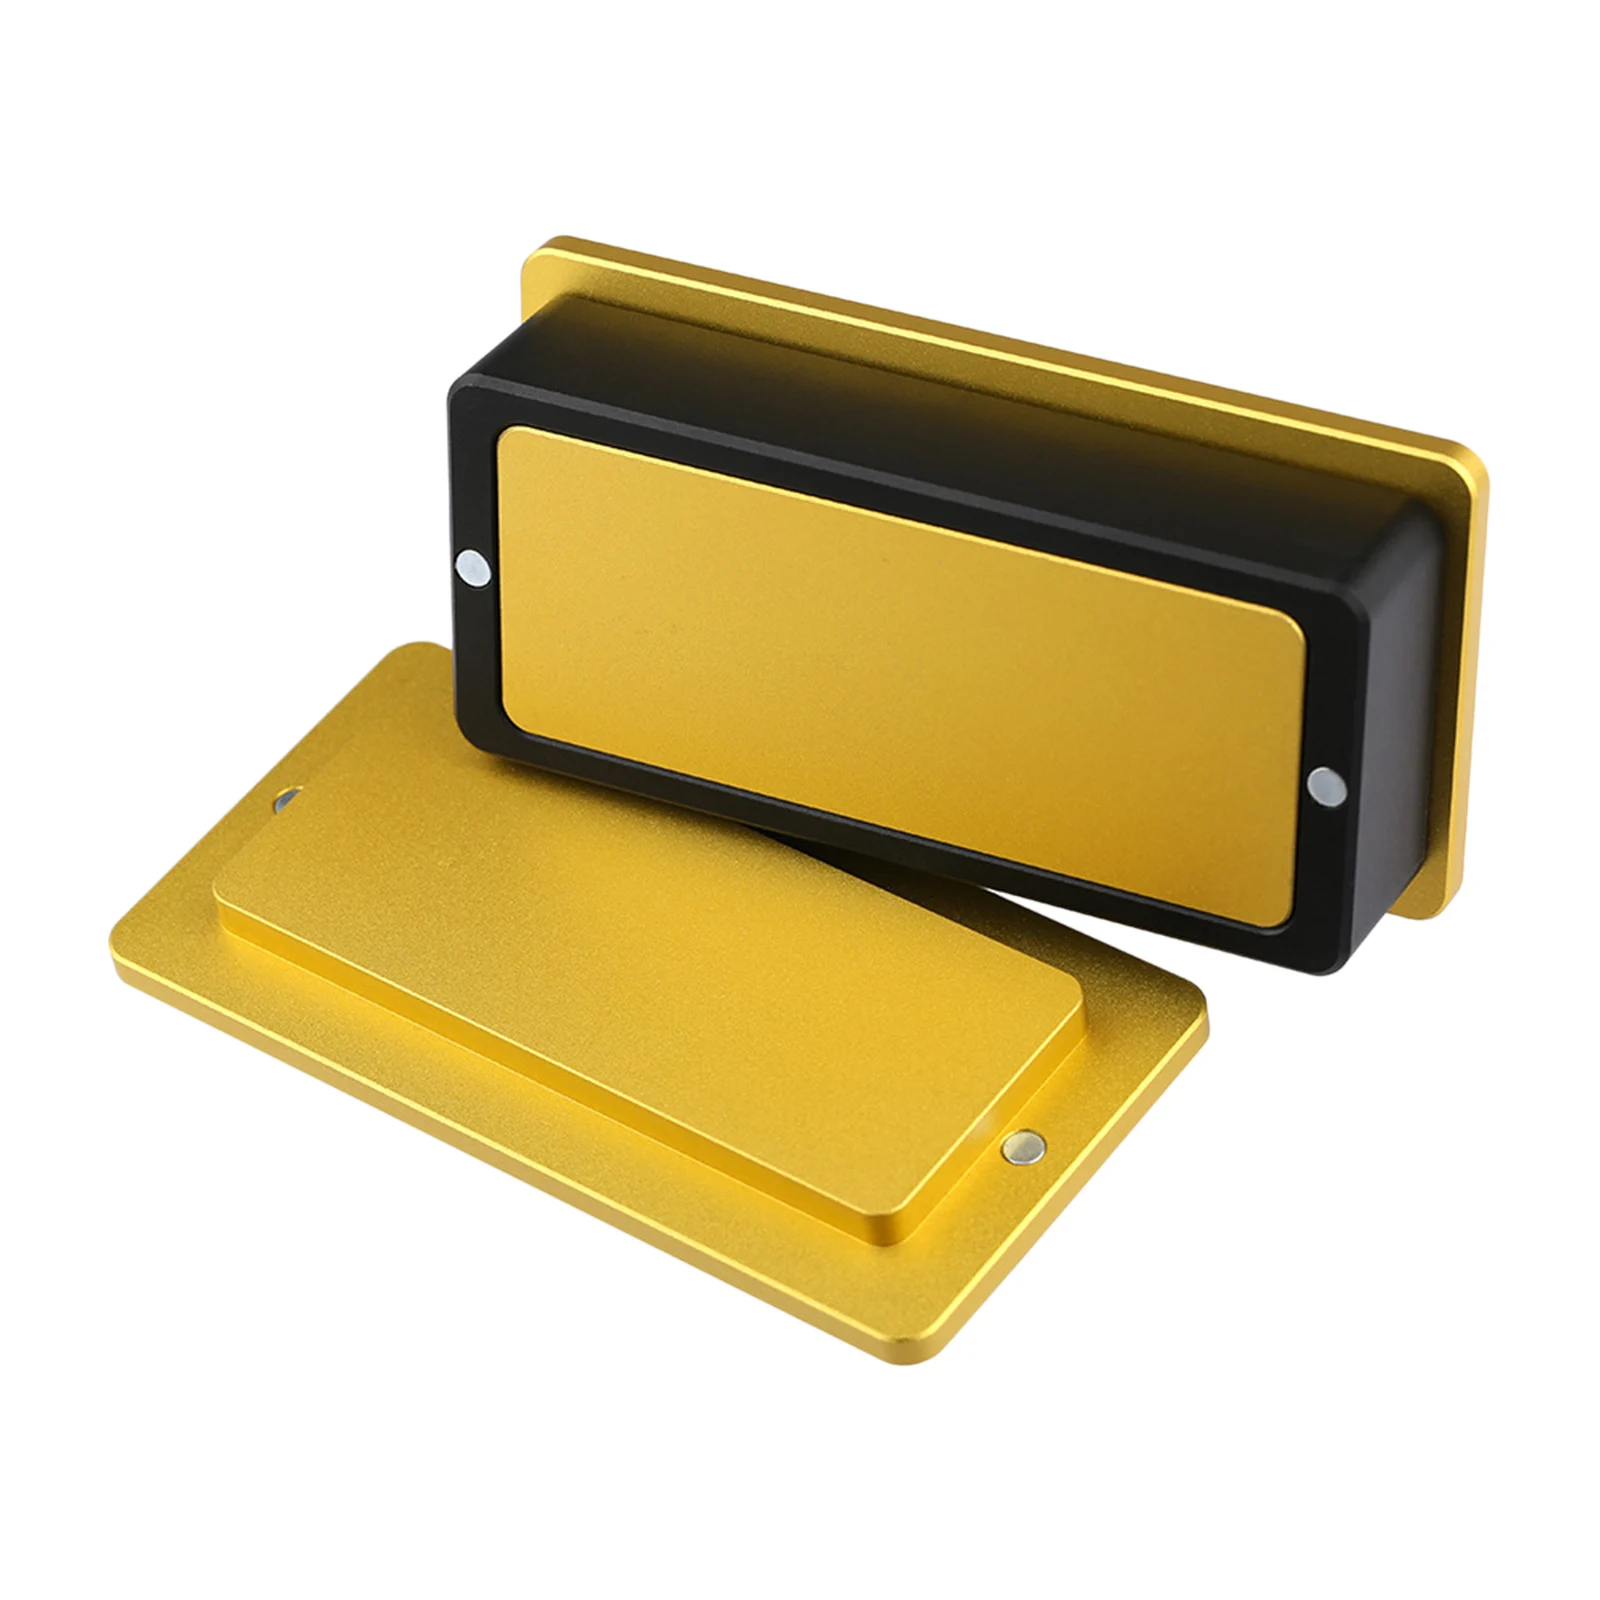 Pre-Press Mold Form Recommend a Vise or Clamp to Assist You Concentrates Wax Oil Rosin Pressing for Making Rectangular Chips